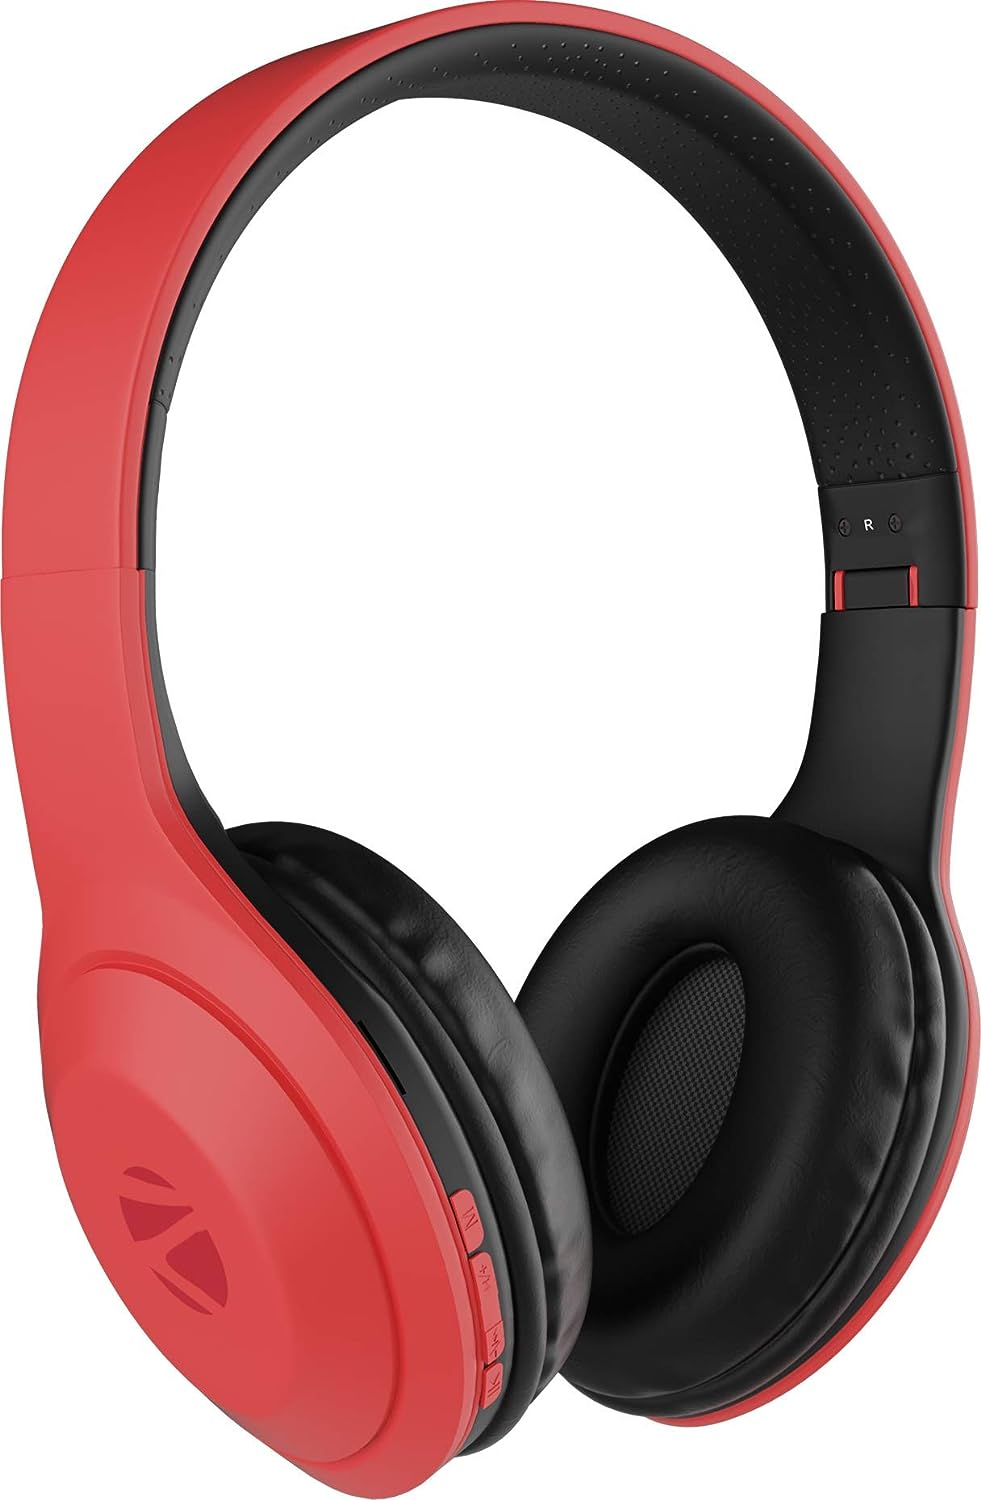 ZEBRONICS Zeb Duke 101 (Red) Wireless Headphone with Mic, Supporting Bluetooth 5.0, AUX Input Wired Mode, mSD Card Slot, Dual Pairing, On Ear & FM,12 hrs Play Back time, Media/Call Controls